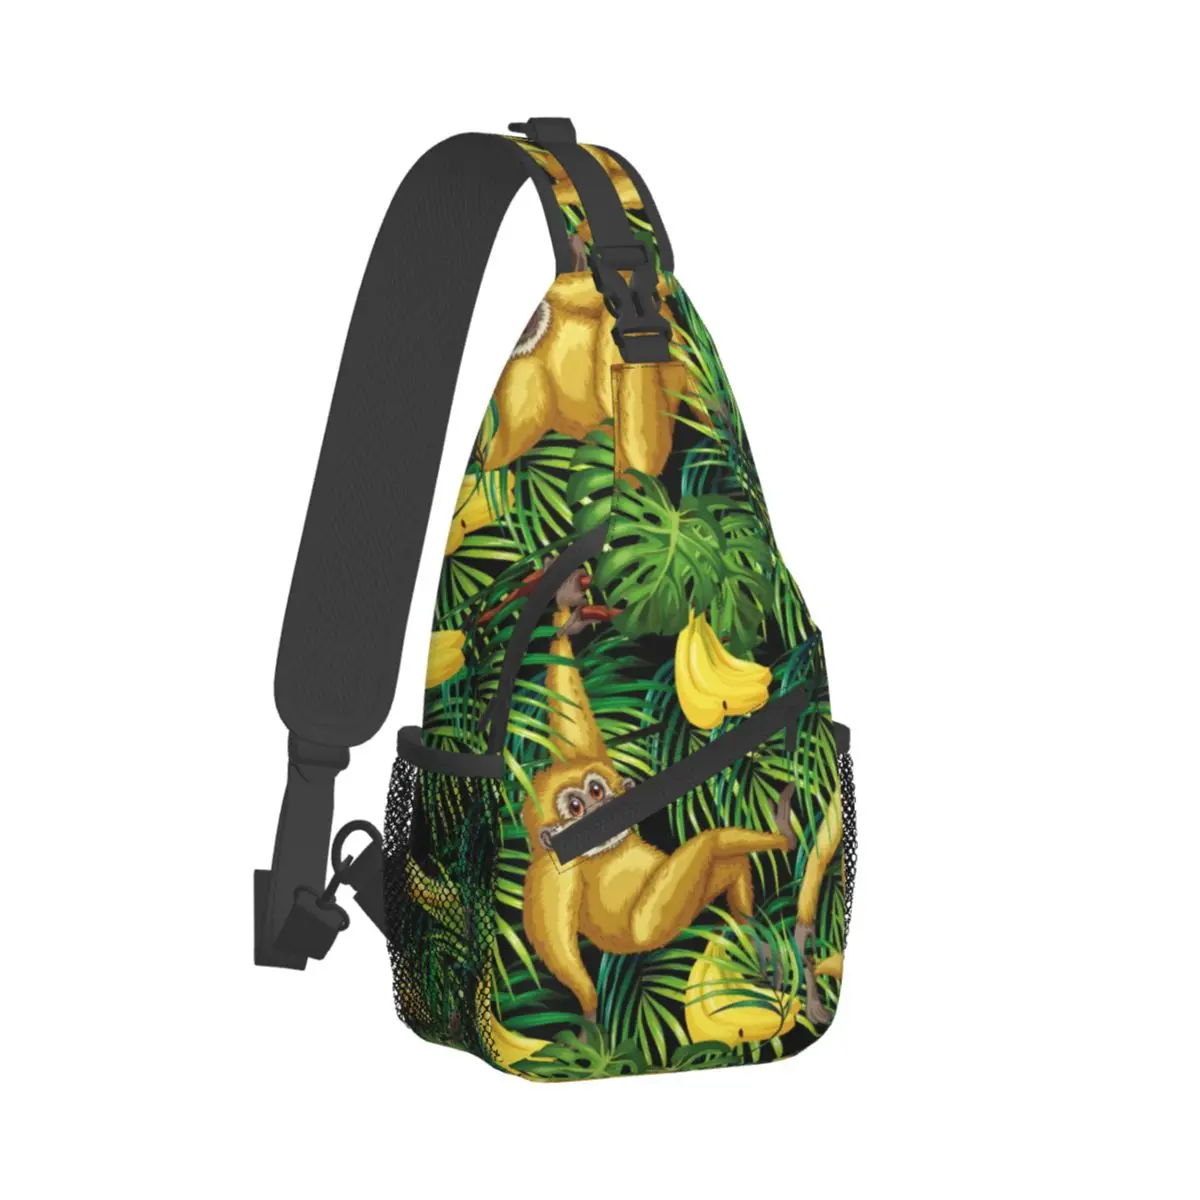 

Monkey Print Chest Bags Tropical Banana Jungle Cycling Shoulder Bag Leisure Graphic Design Small Bag Phone Running Sling Bags